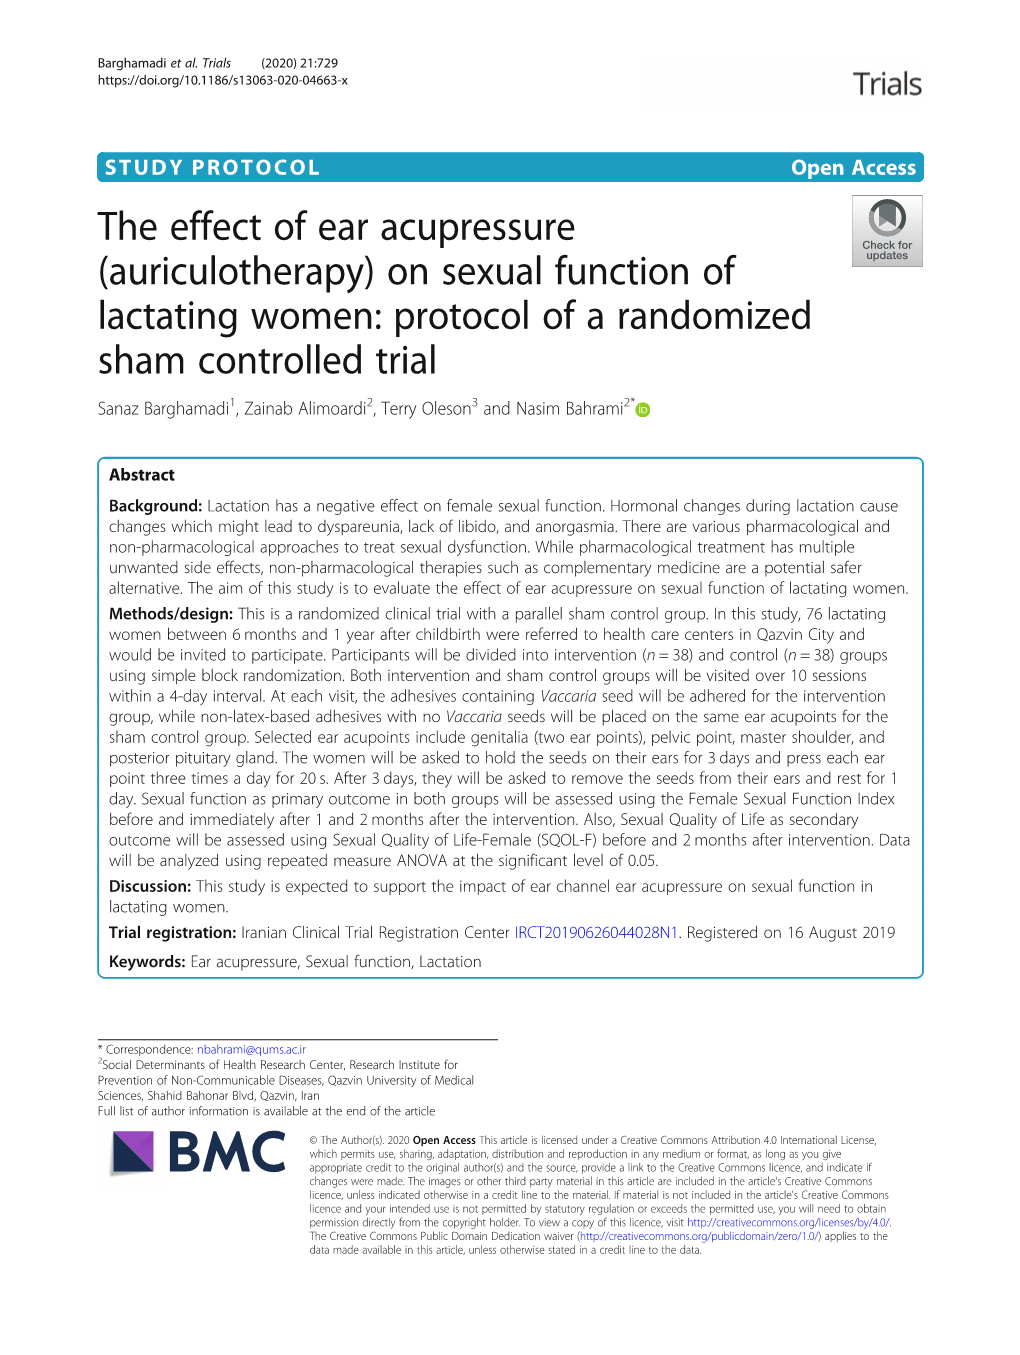 The Effect of Ear Acupressure (Auriculotherapy) On